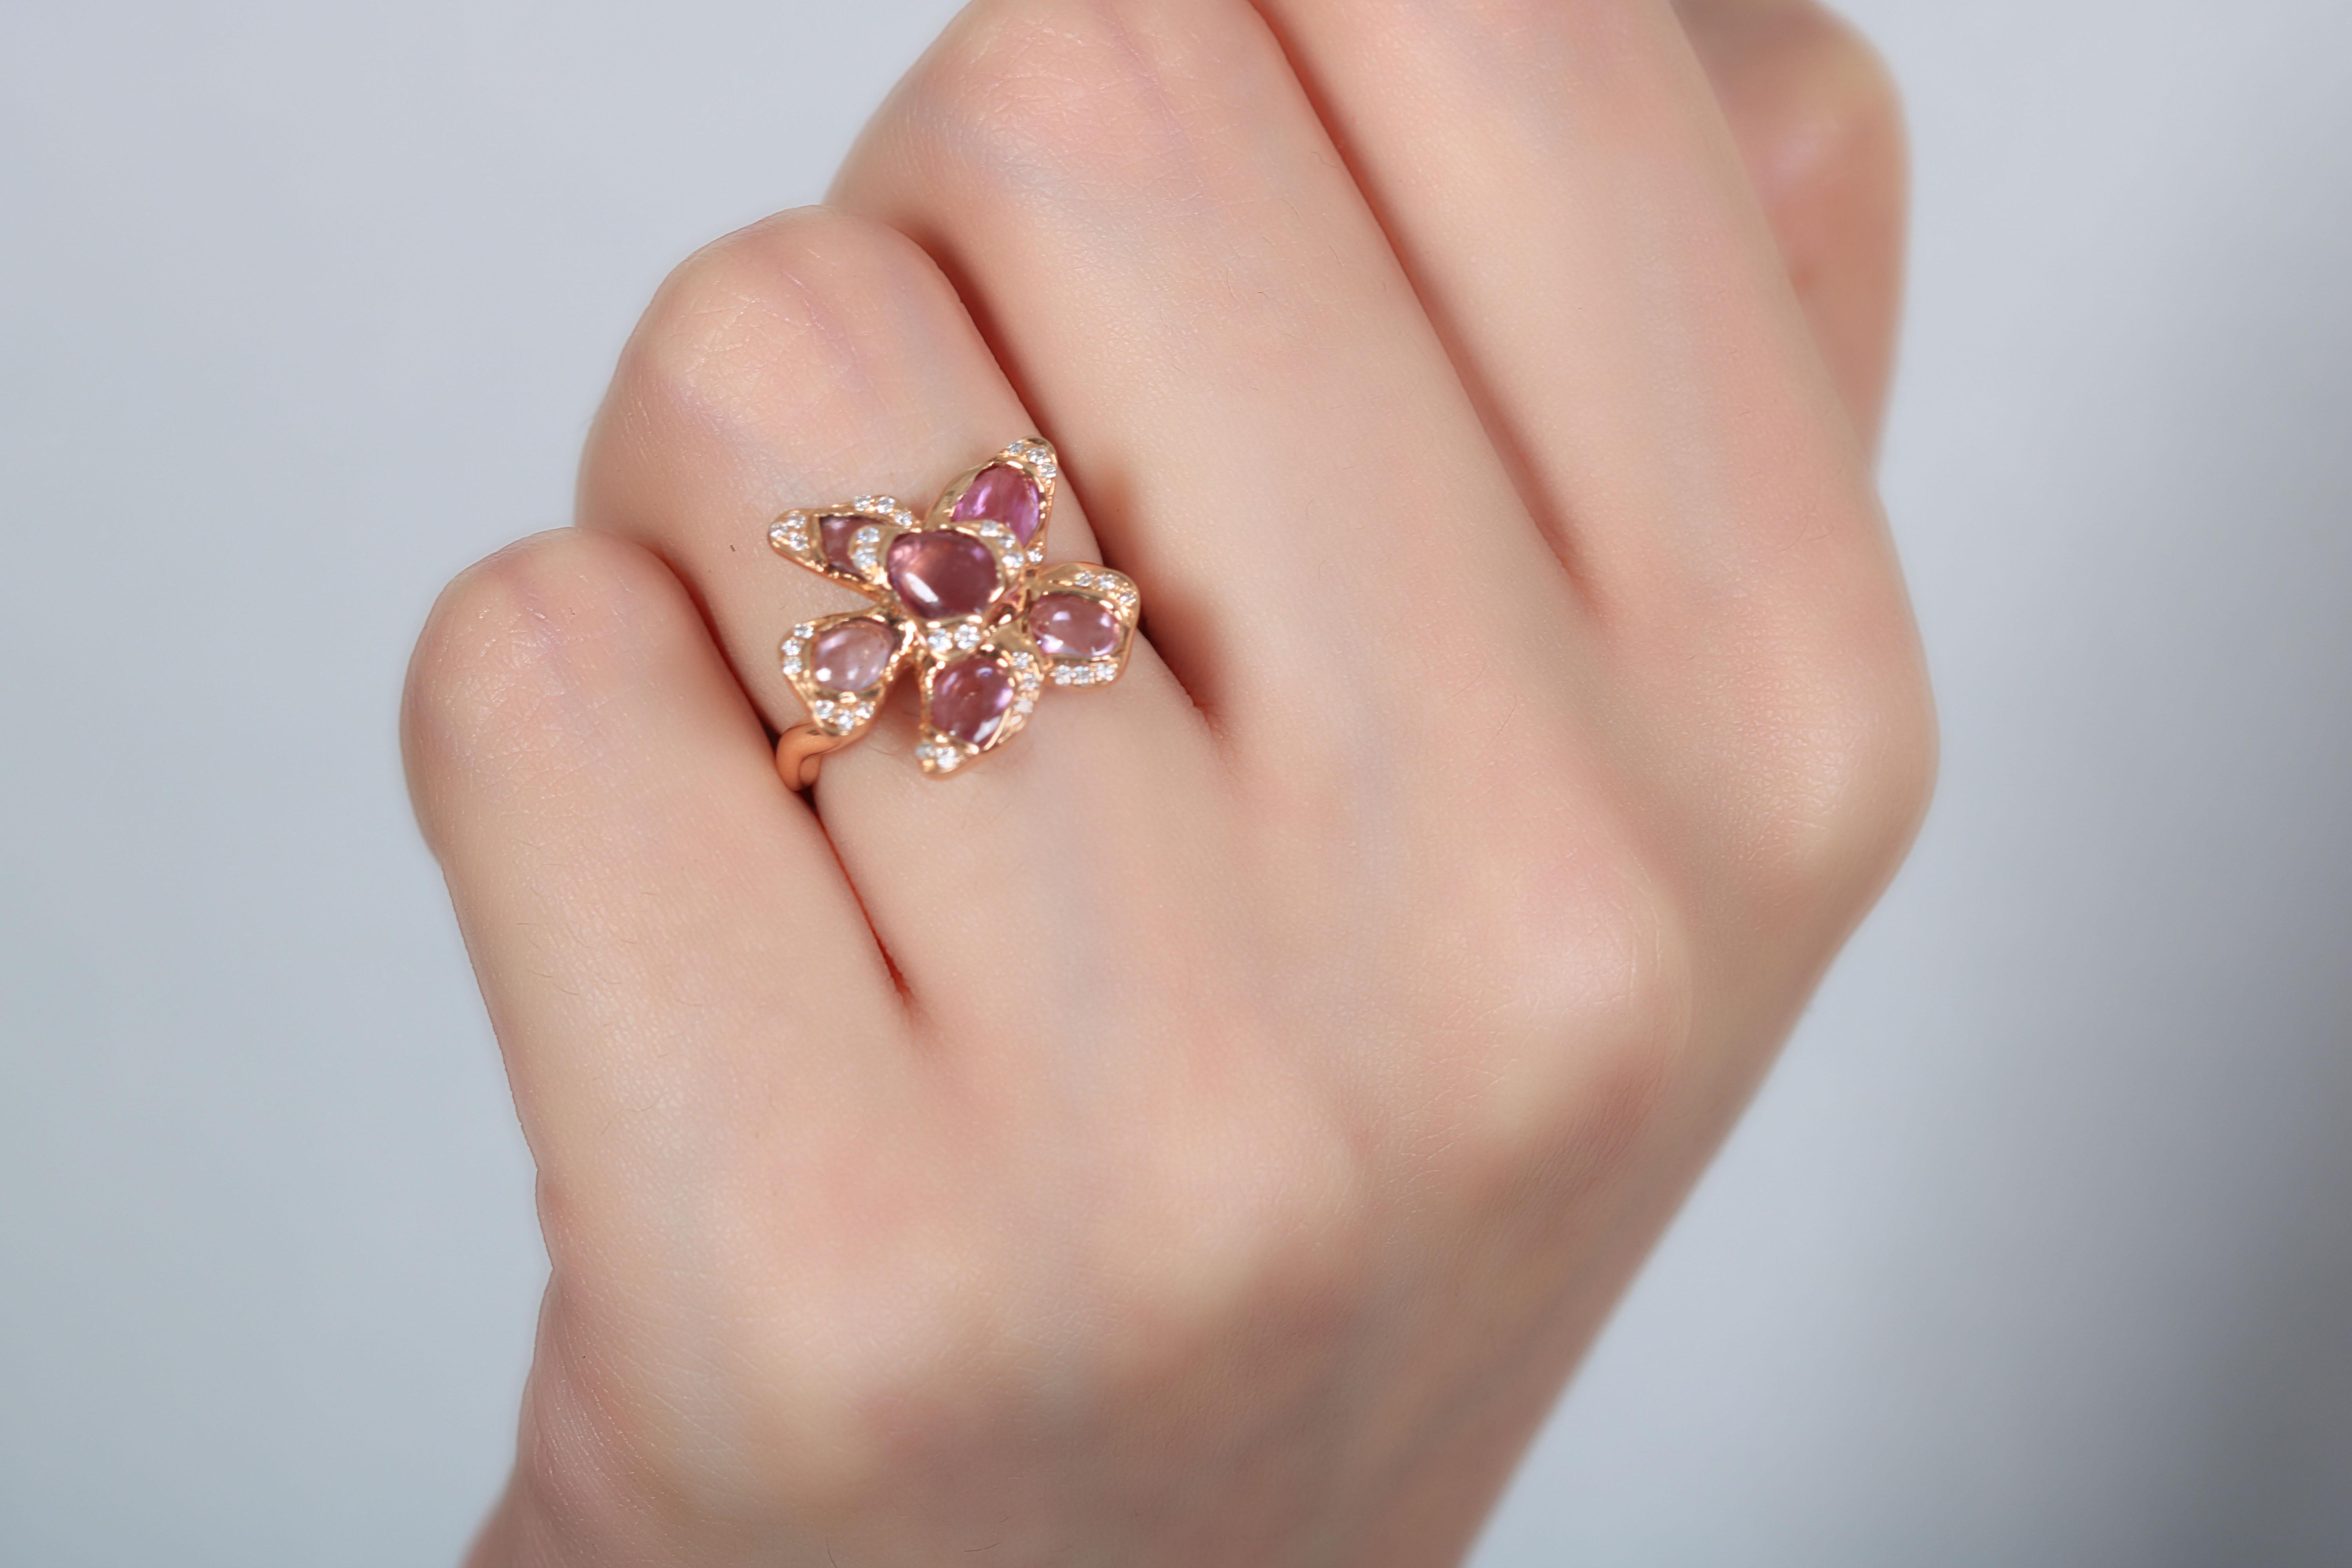 An elegant sapphire ring with a dramatic centerpiece comprised of the finest pink sapphires and white diamonds. The placement of the sapphires and diamonds is breathtaking and intertwined to make the ultimate impact. With a subtle extravagance, this